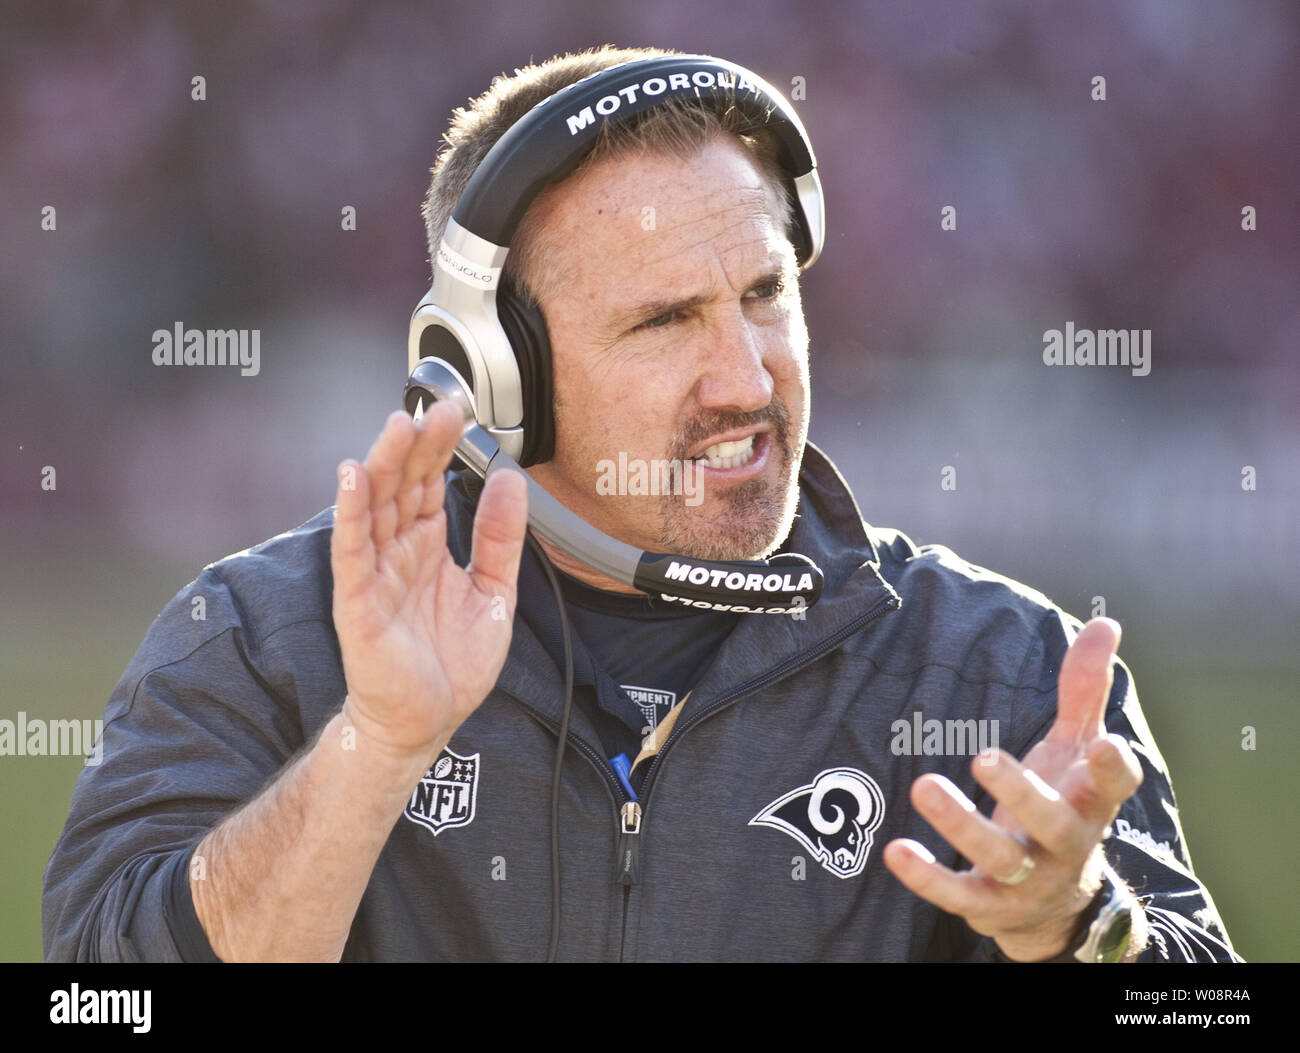 St. Louis Rams Head Coach Steve Spagnuolo gives encouragement  as his team gets shut out by the San Francisco 49ers at Candlestick Park in San Francisco on December 4, 2011. The 49ers defeated the Rams 26-0 to clinch the NFC West.  UPI/Terry Schmitt Stock Photo